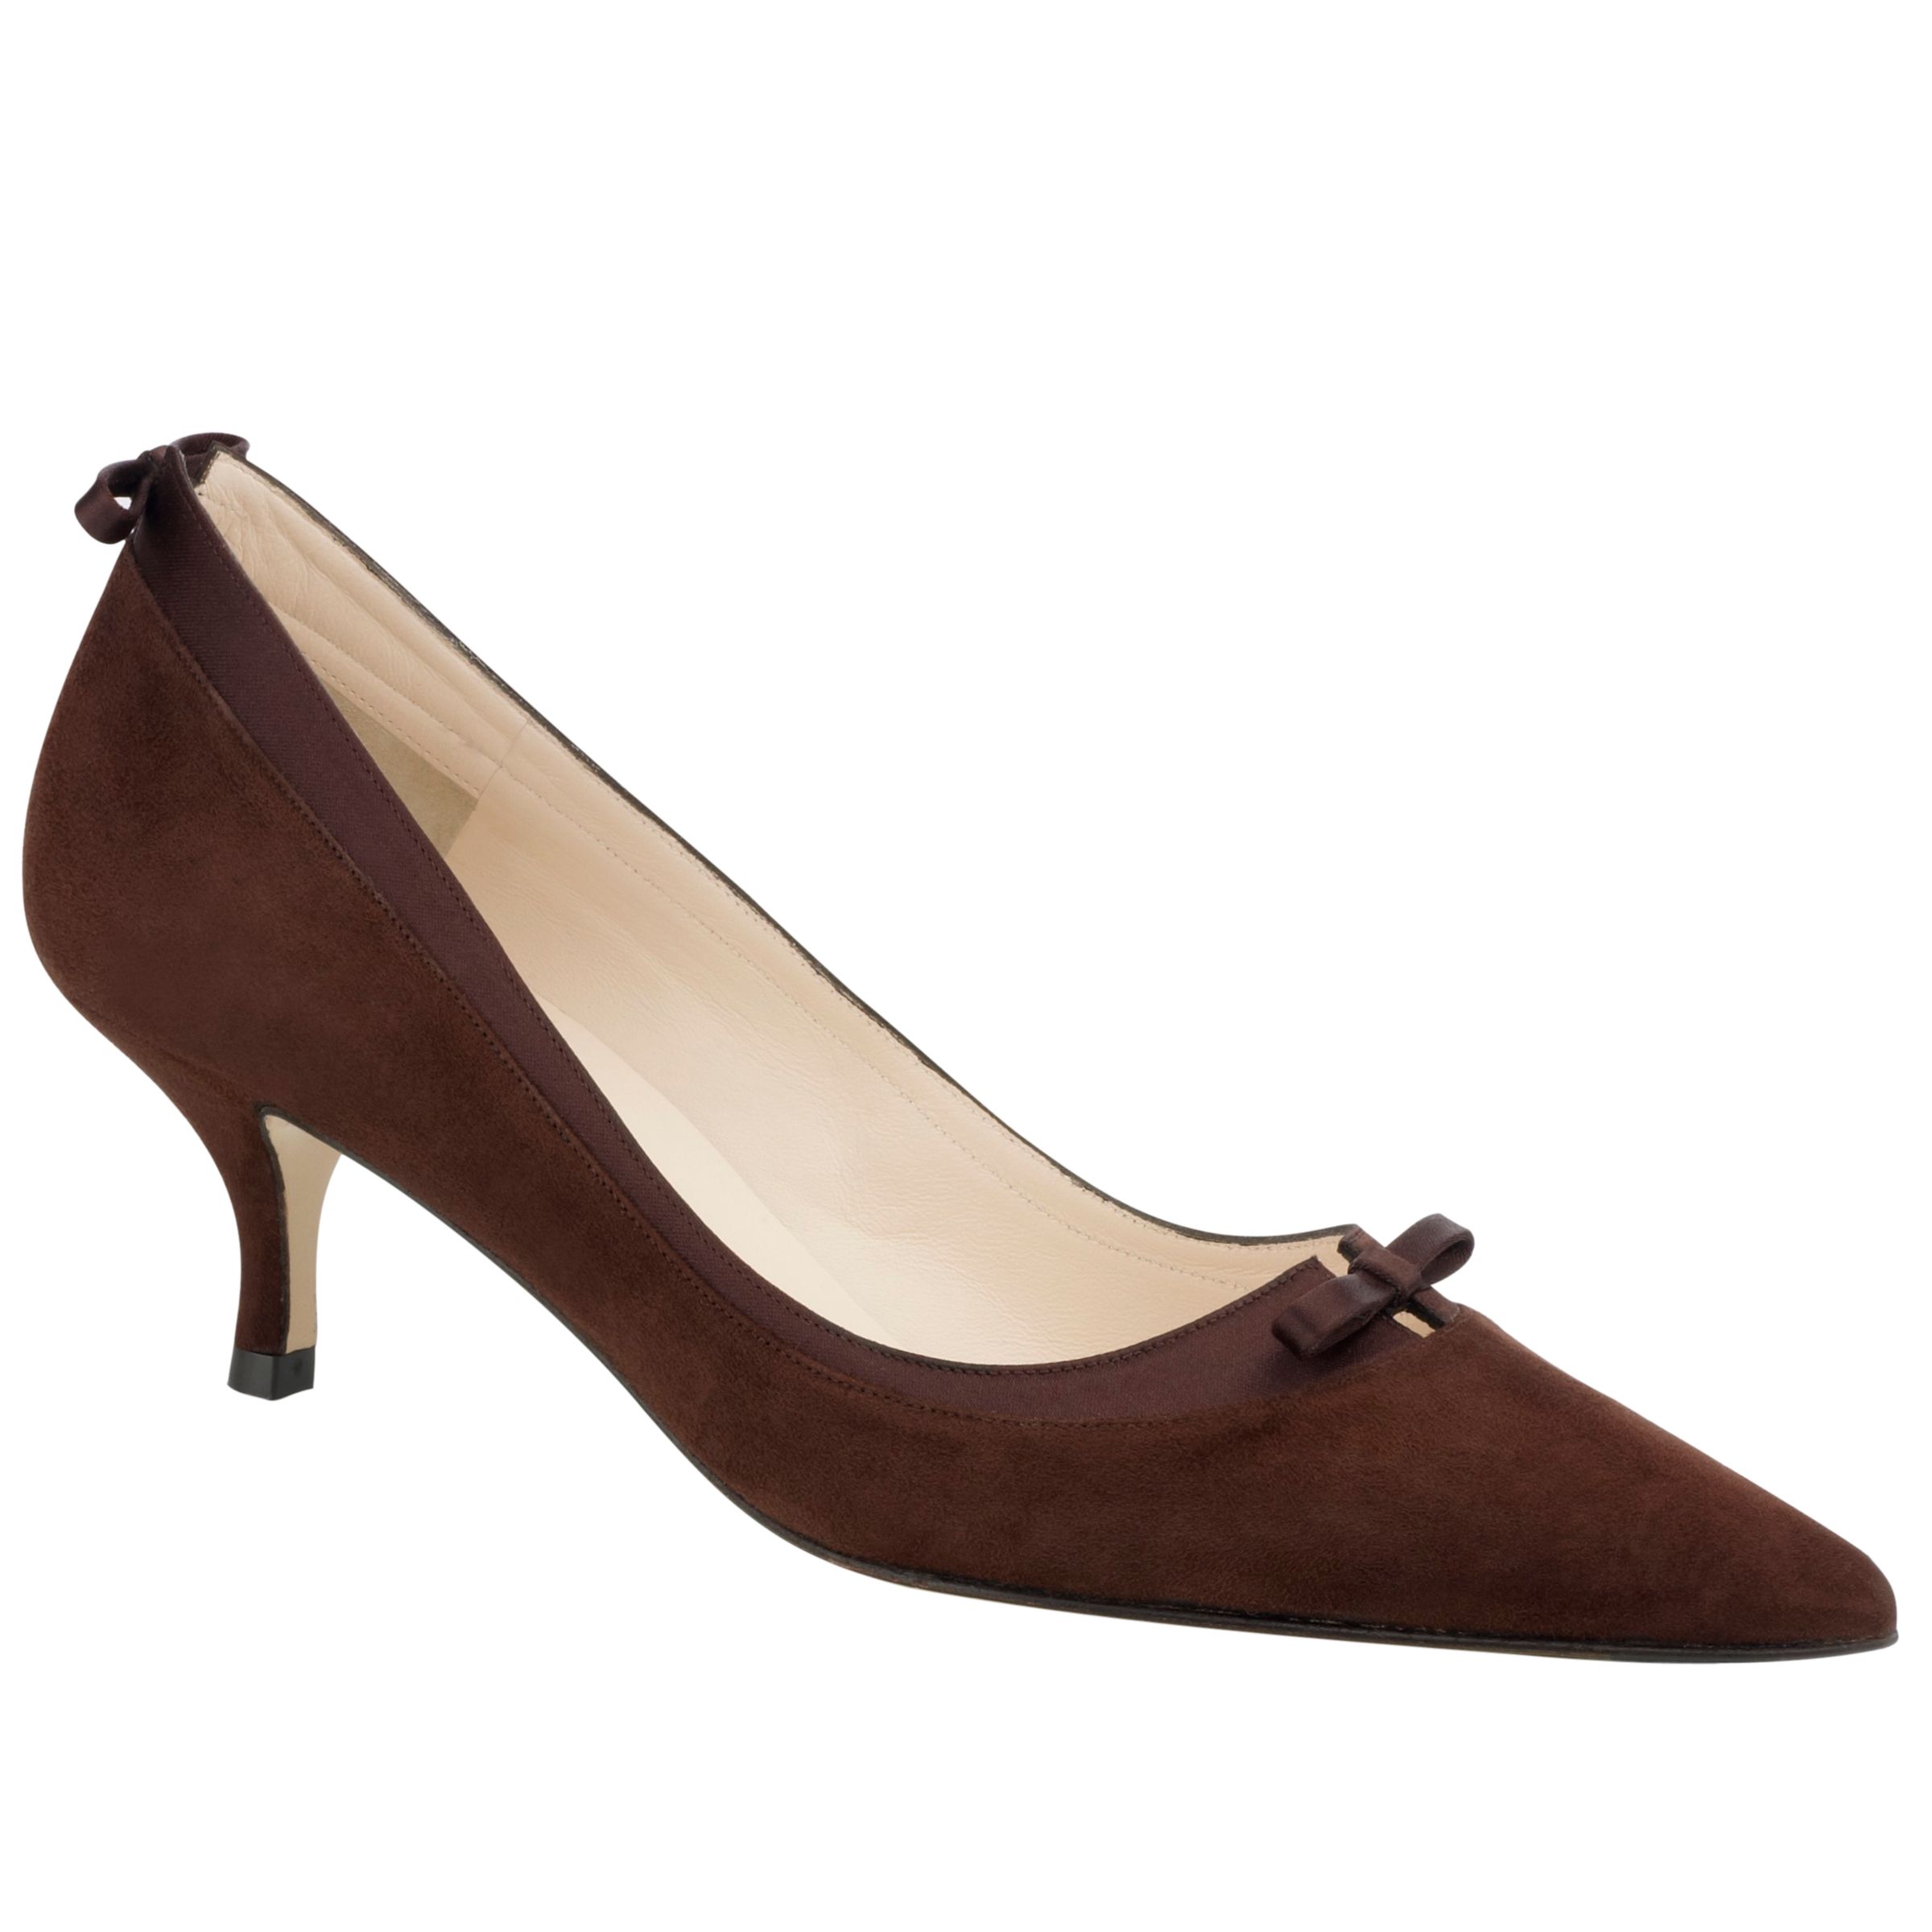 L.K.Bennett Phoebe Suede Court Shoes, Brown at JohnLewis